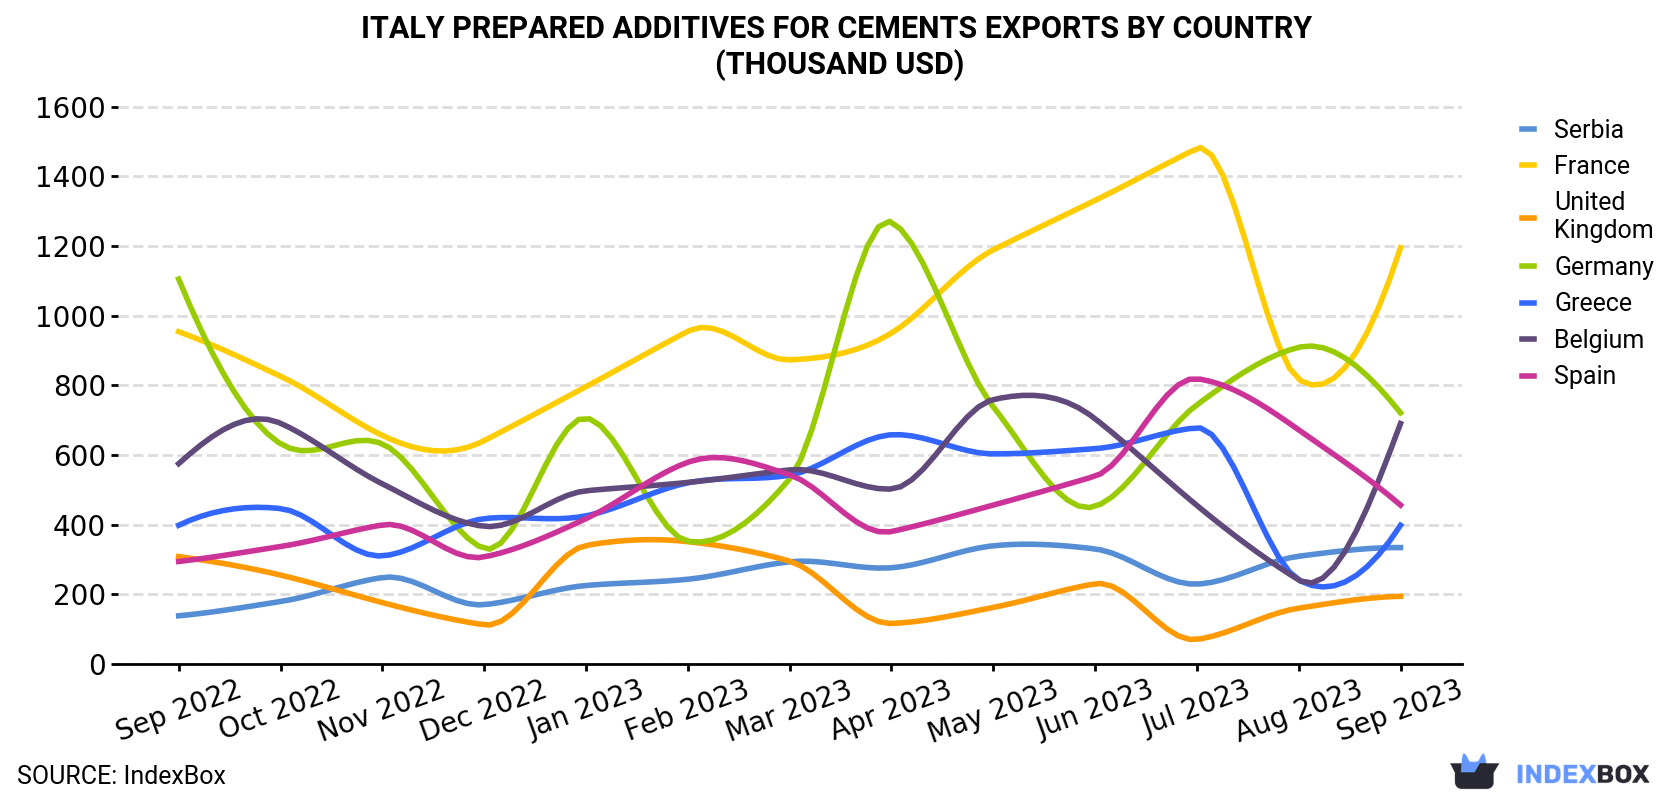 Italy Prepared Additives For Cements Exports By Country (Thousand USD)